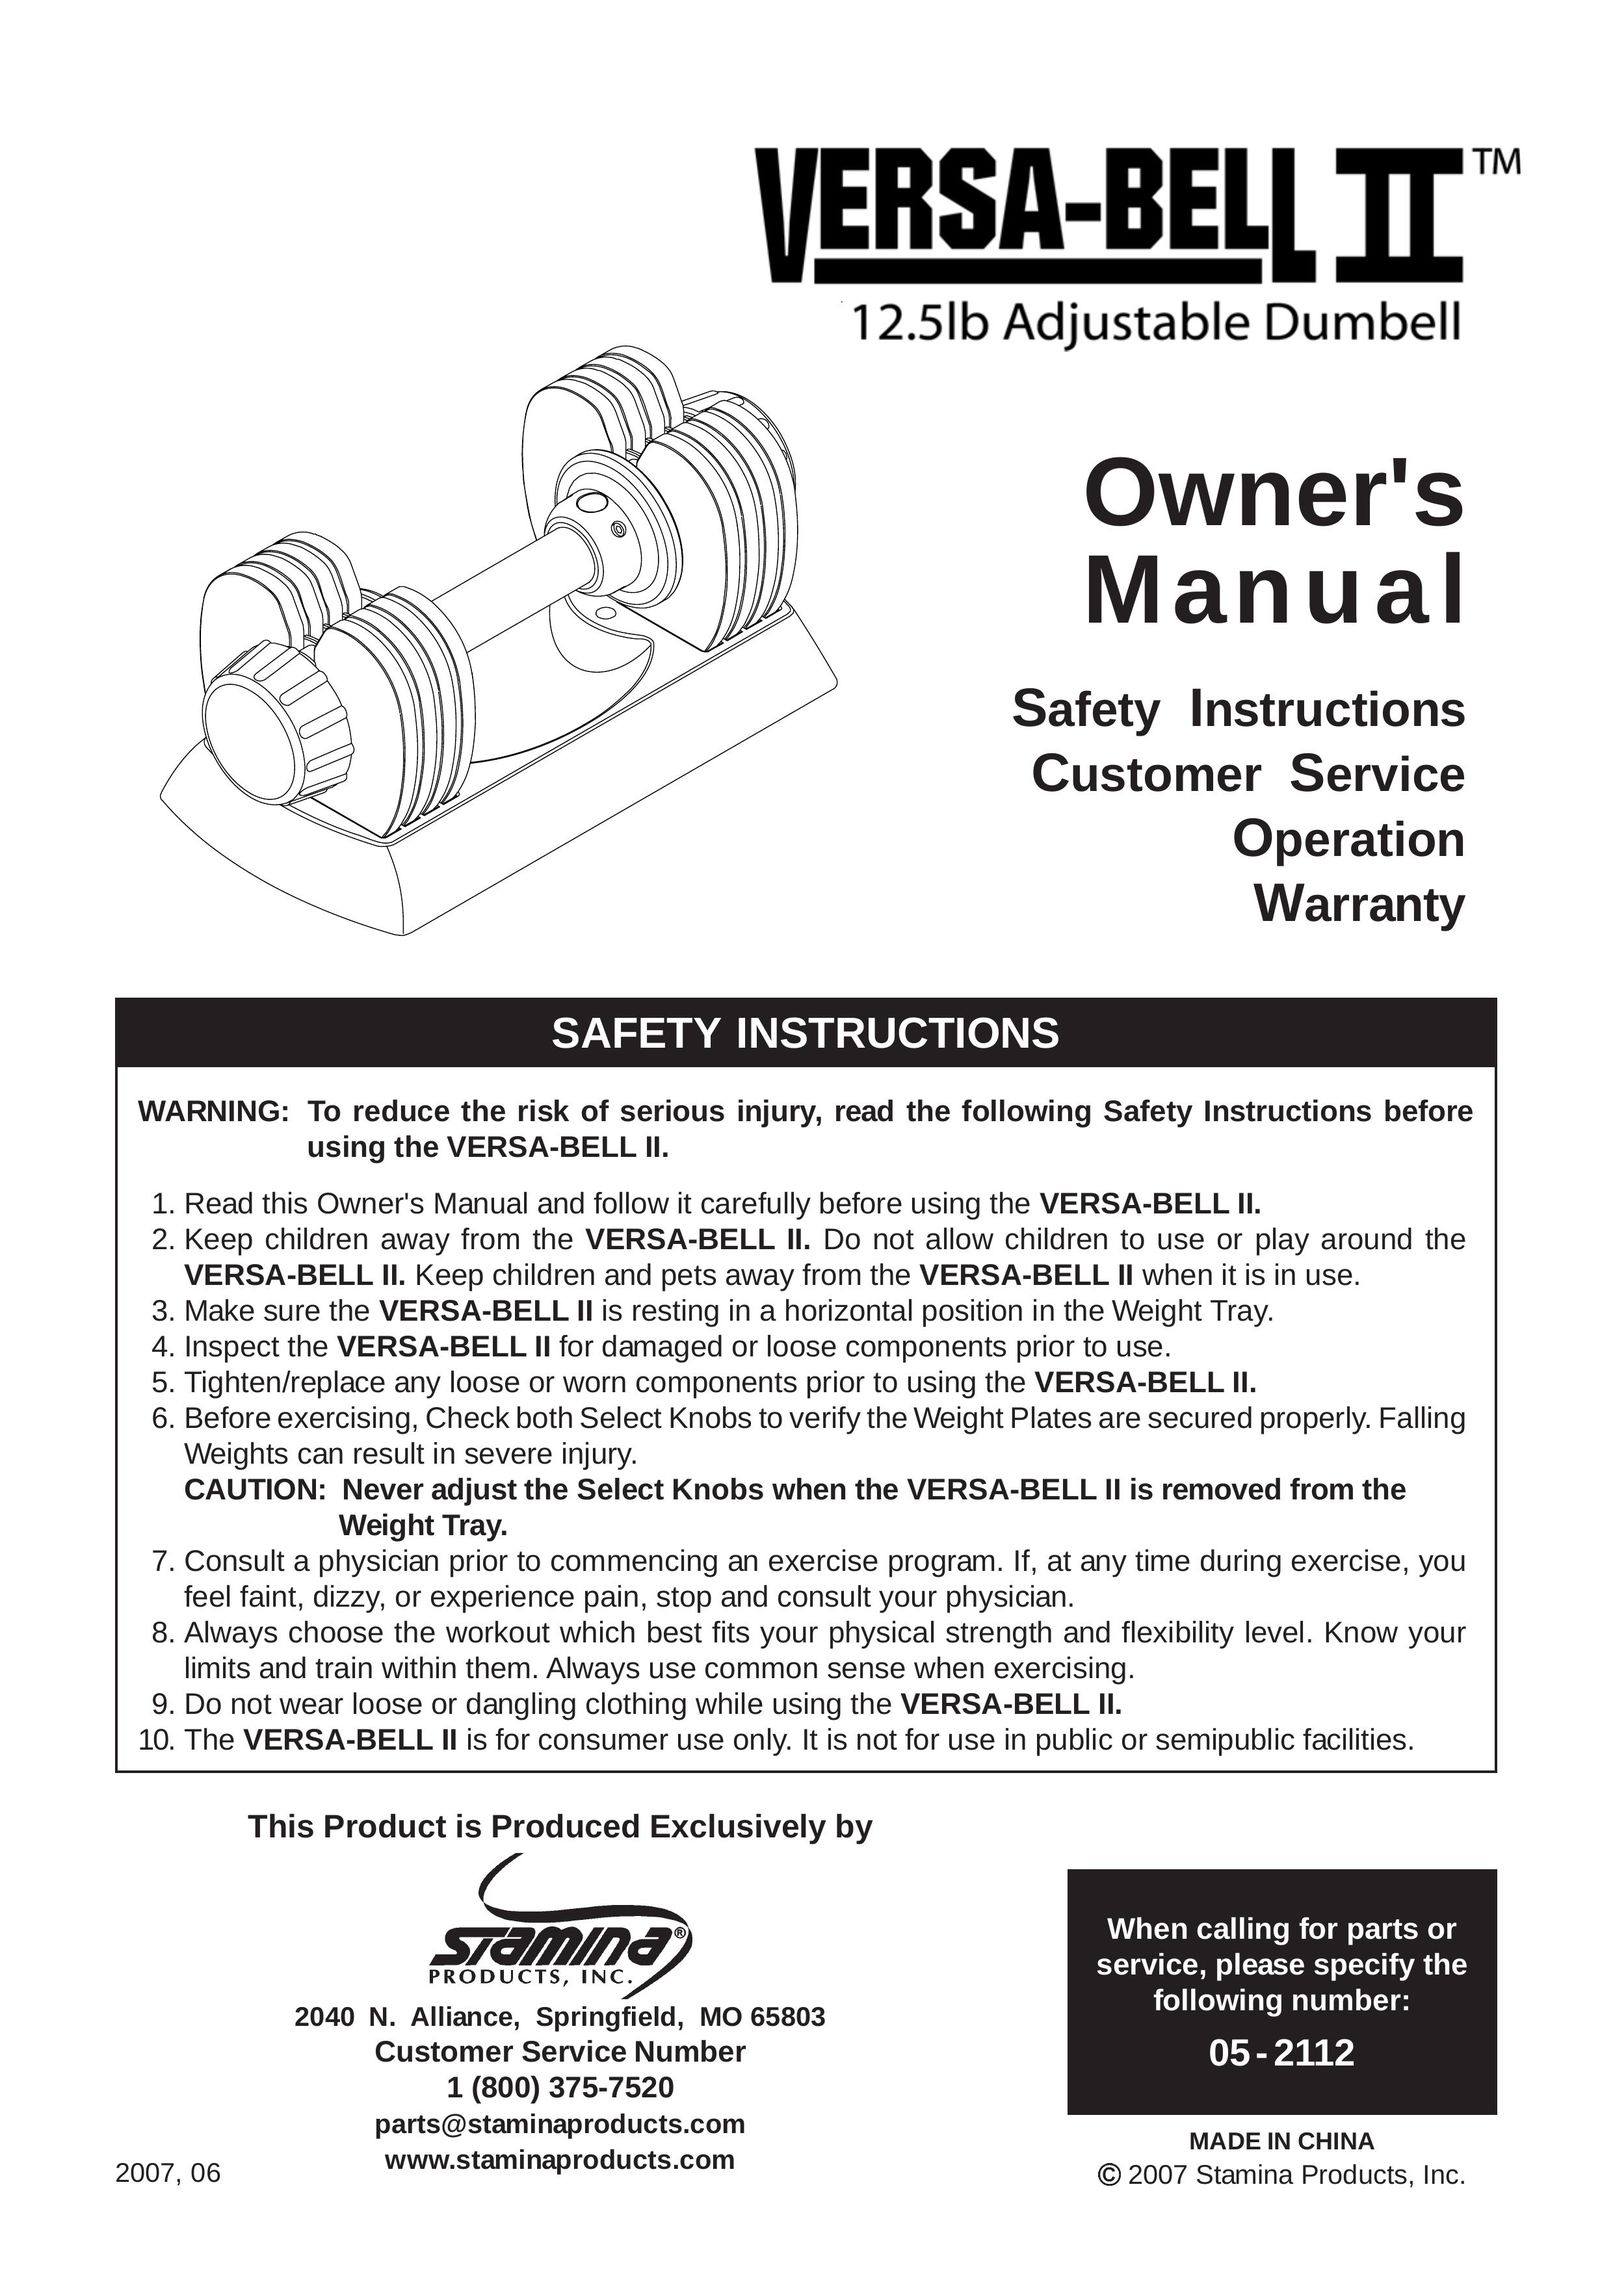 Stamina Products VERSA-BELL II Fitness Equipment User Manual